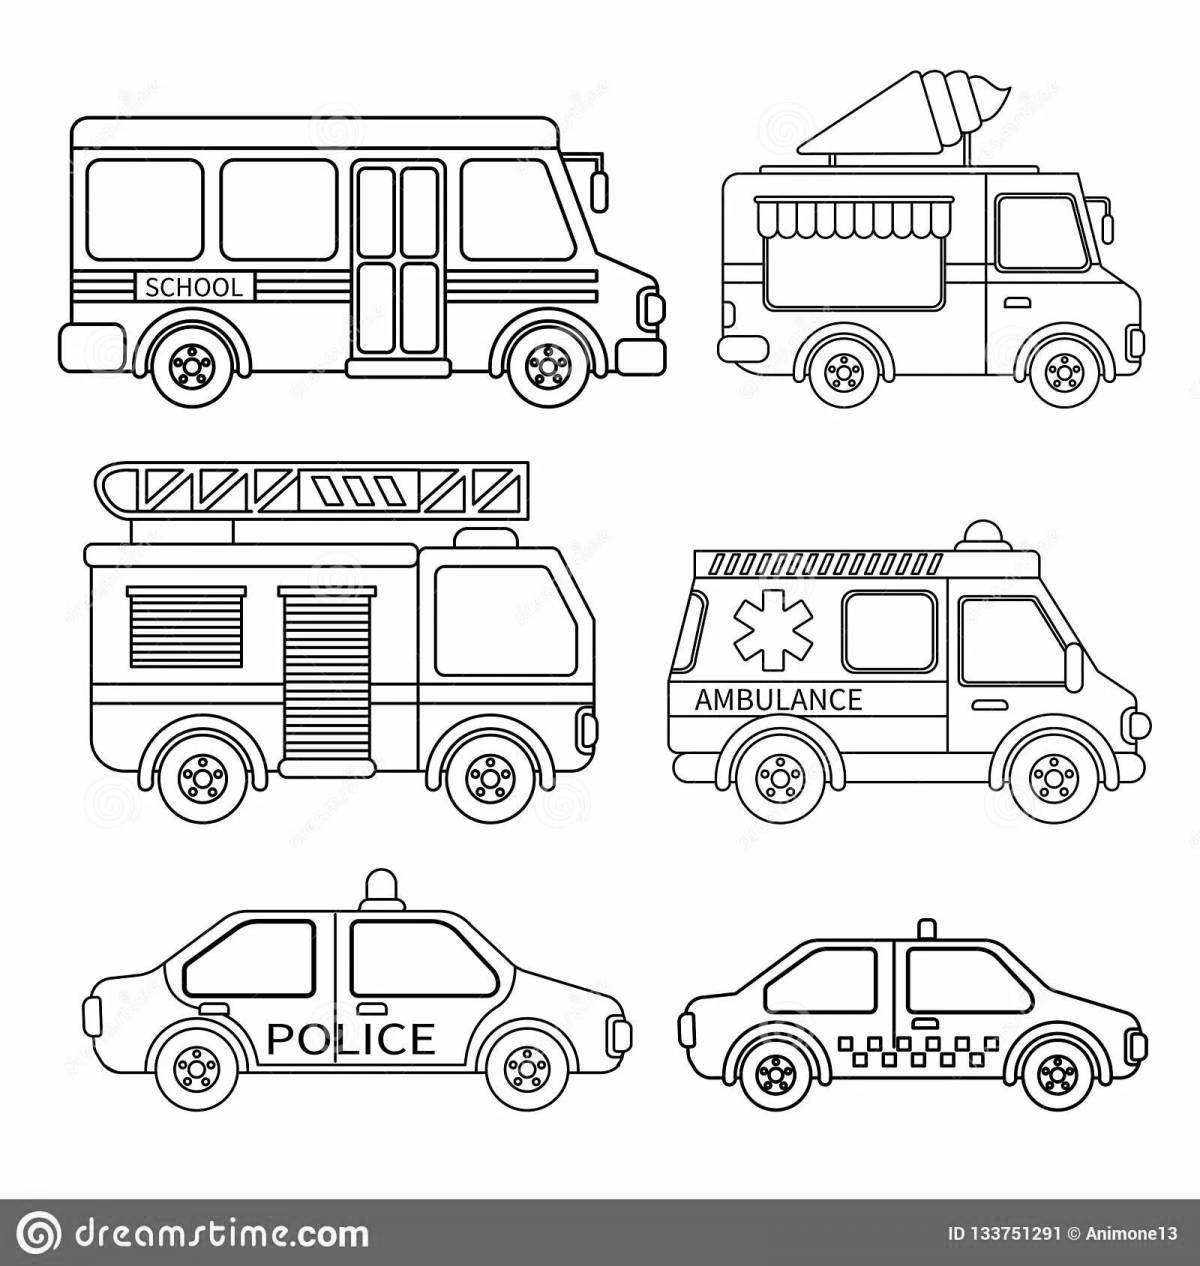 Colorific special transport coloring page for 6-7 year olds